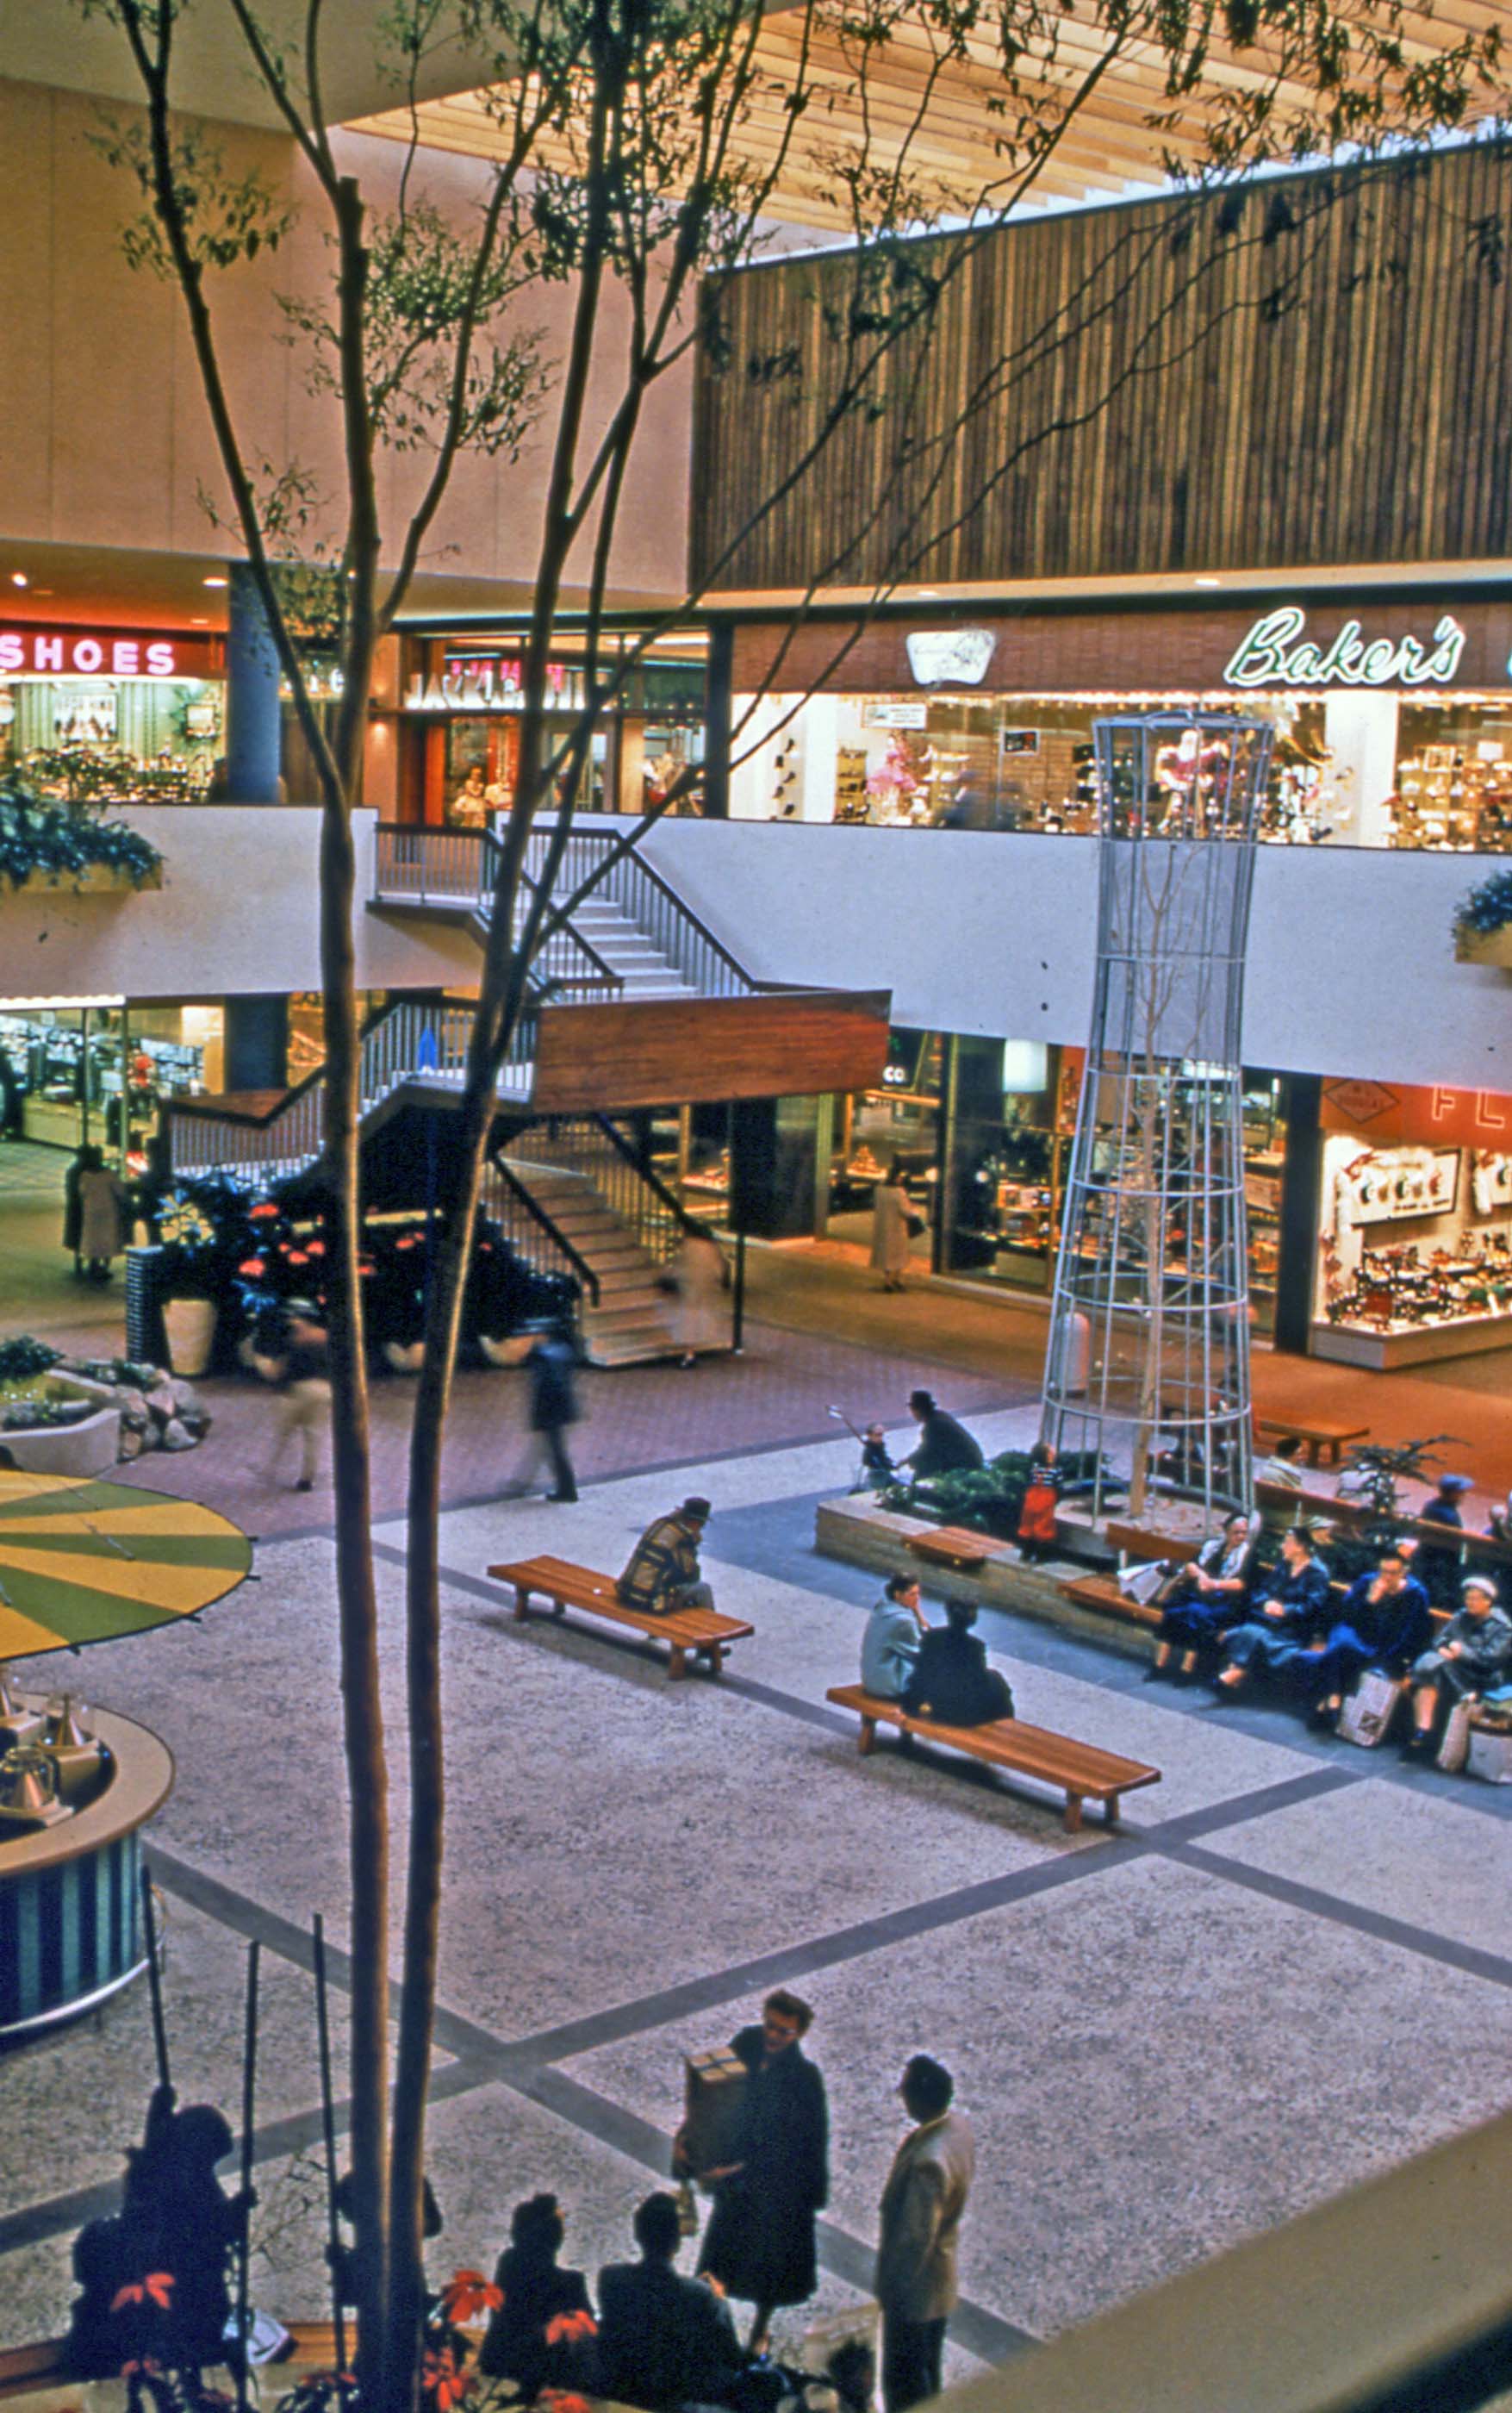 archival photo of a shopping mall with two levels and an escalator